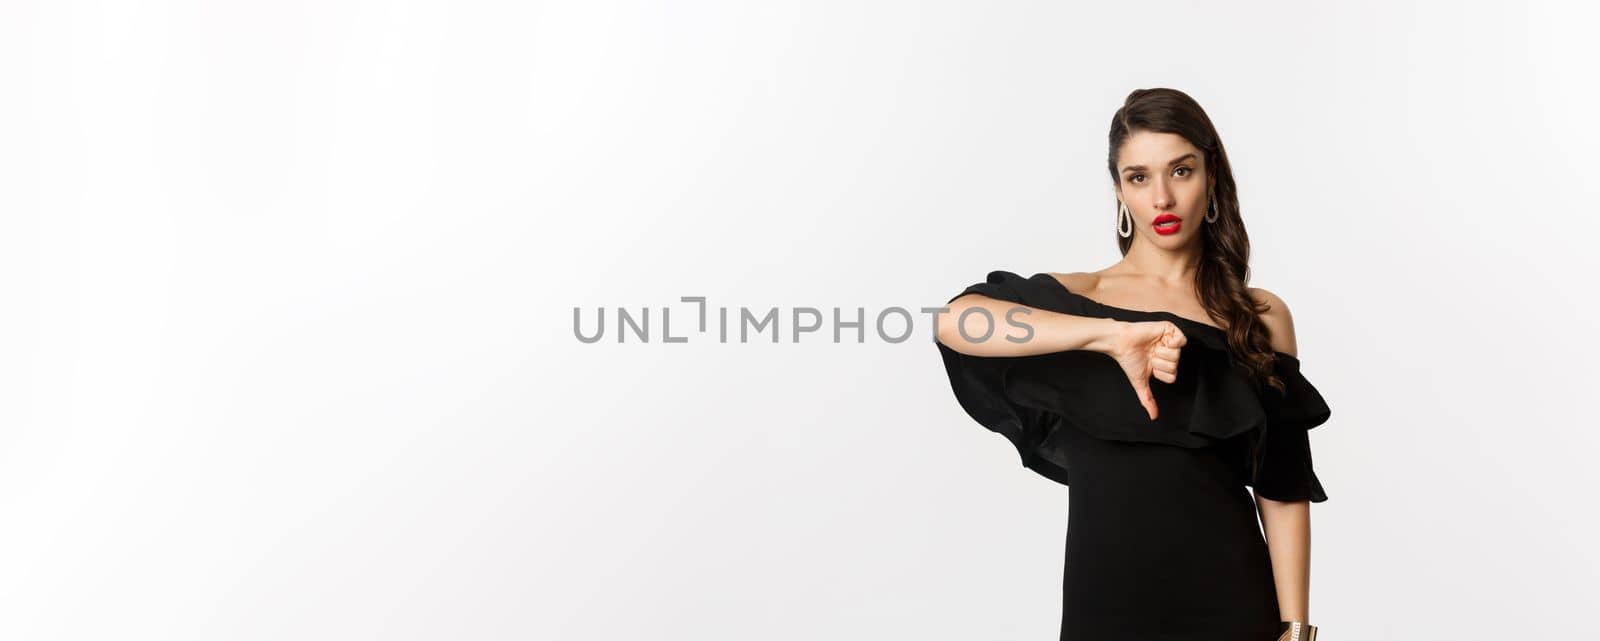 Fashion and beauty. Disappointed sassy woman in black dress, showing thumbs down, dislike something bad, judging over white background.